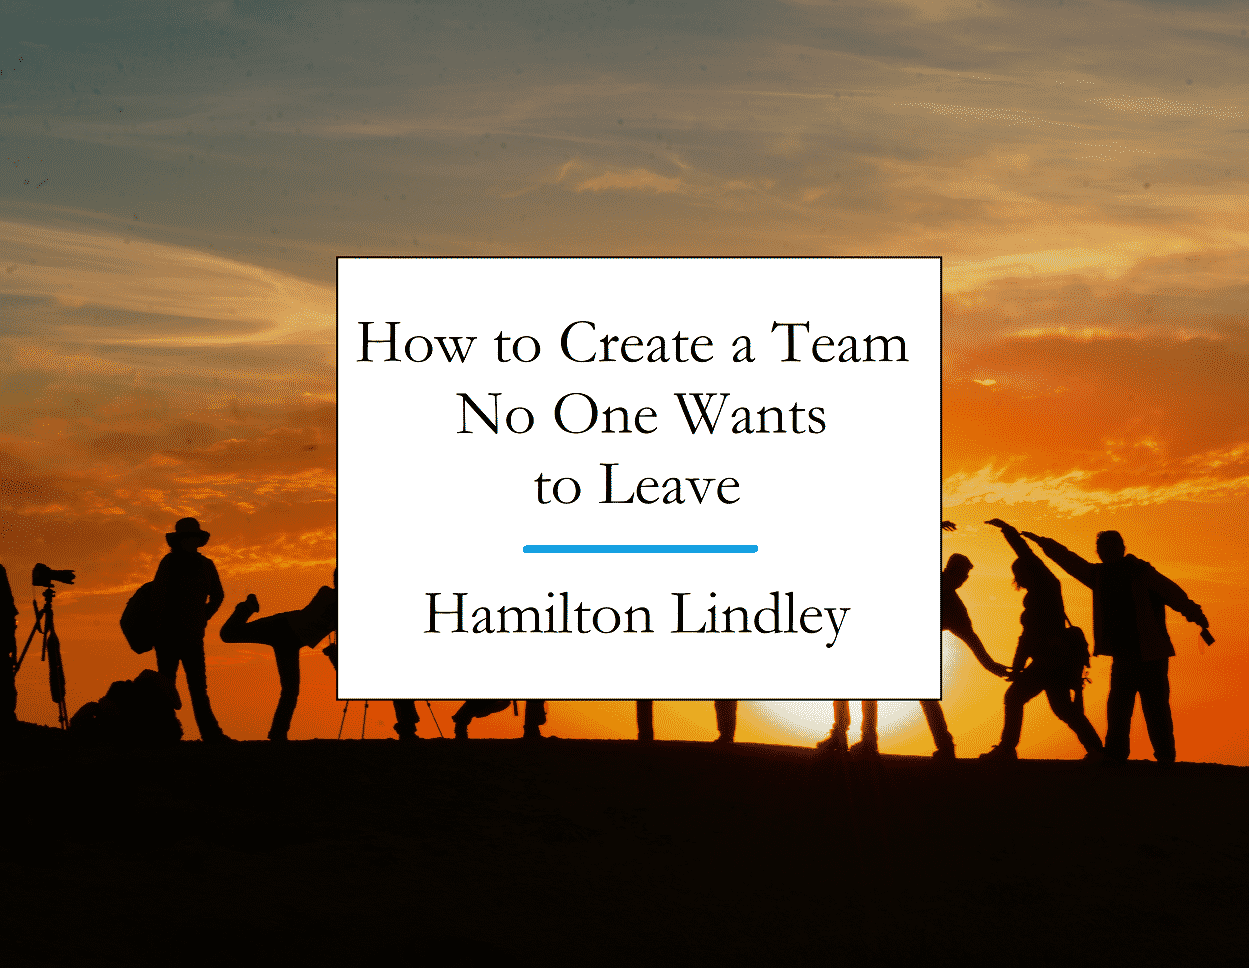 How to Create a Team That No One Wants to Leave